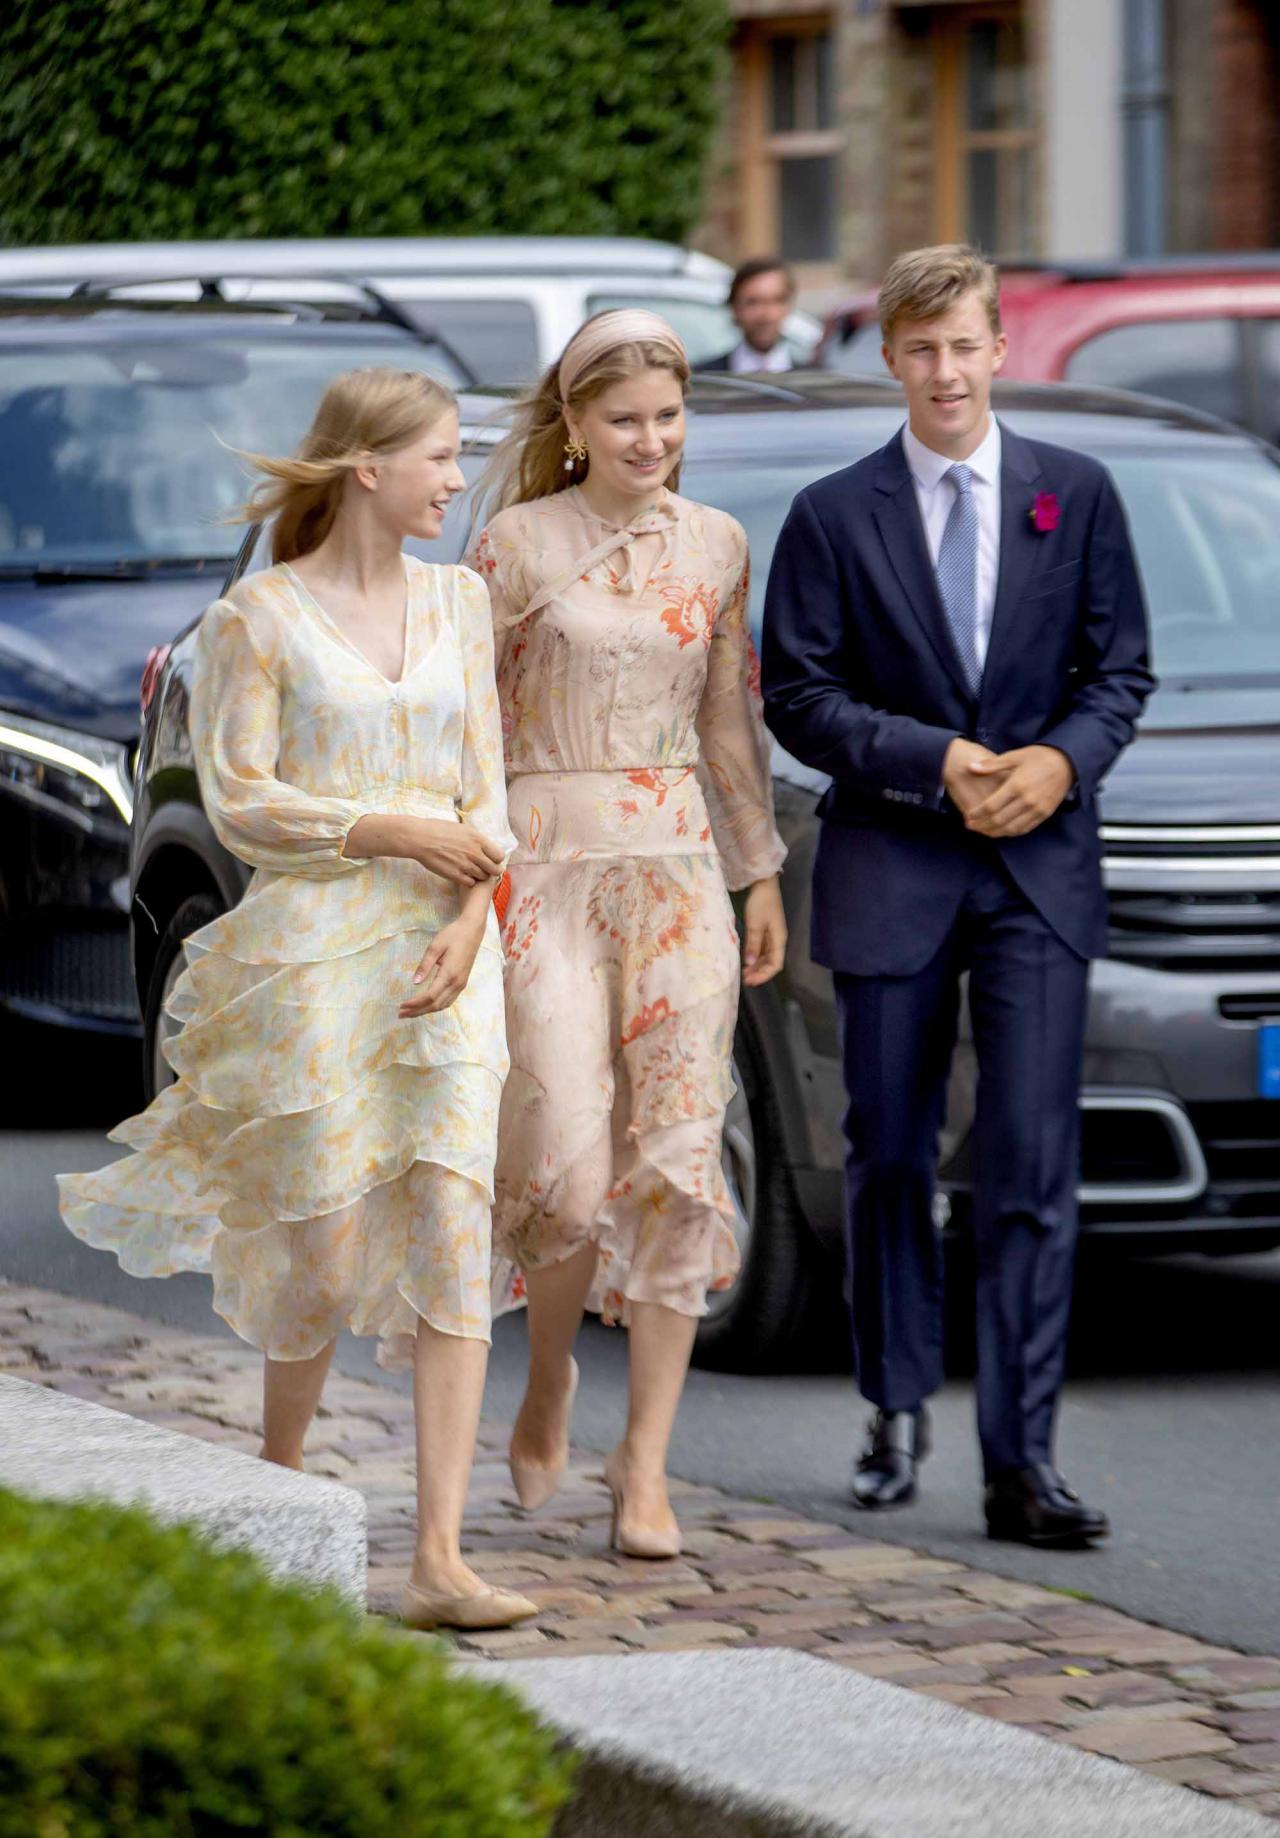 03-08-2022 Marriage Wedding of Count Charles-Henri d Udekem d Acoz, the younger brother of the Belgium Queen, and Caroline Philippe at Pont-L Eveque in France.Princess Elisabeth and Prince Emmanuel and Princess Eleonore© ddp images/PPE/Nieboer Point de Vue out